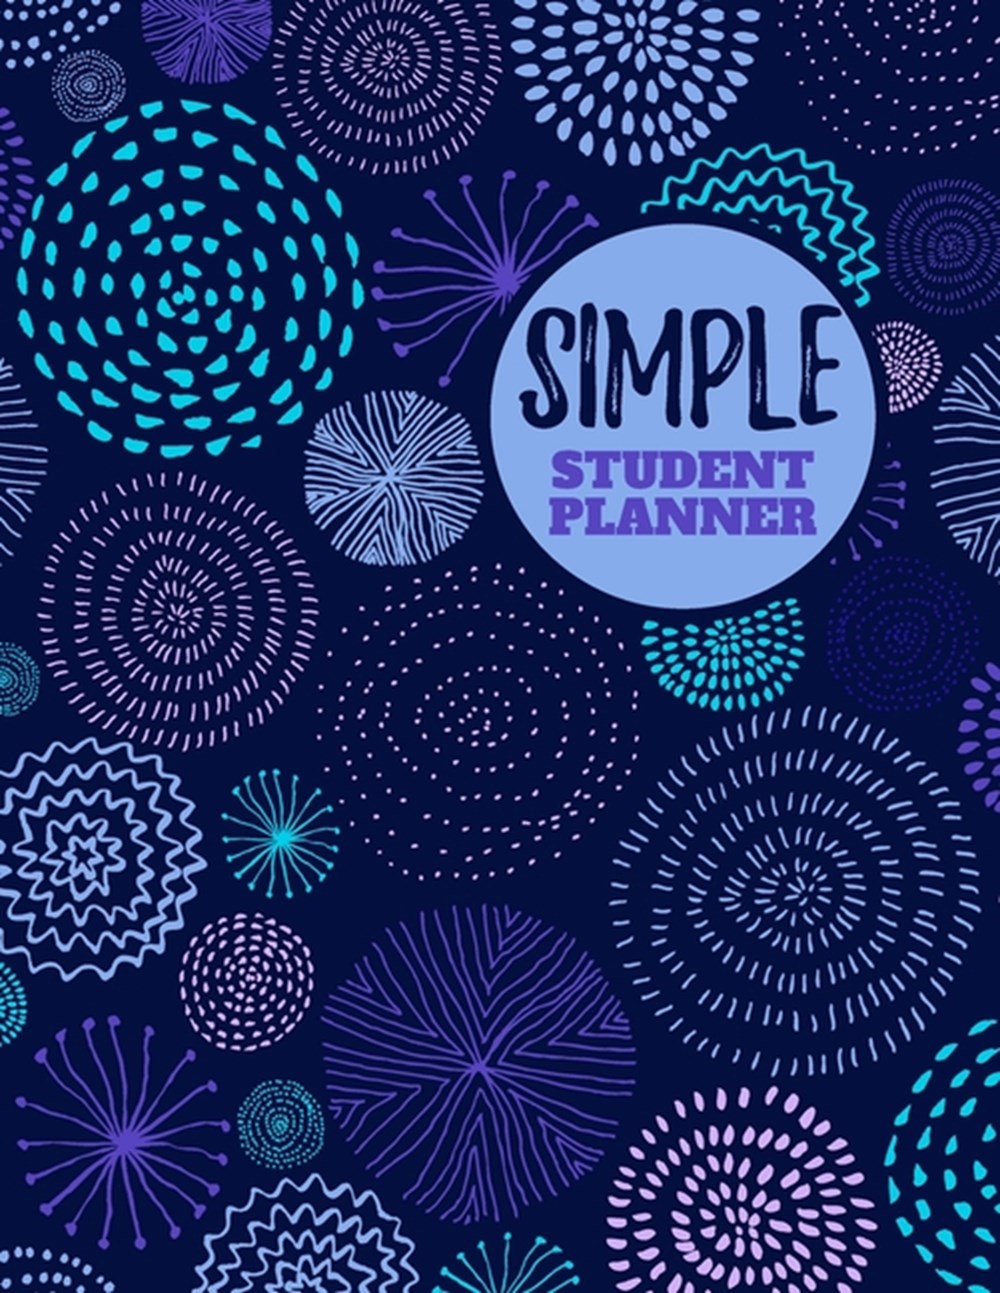 Simple Student Planner and Workbook to Track Assignments, Classes and Grades Academic Organizer for 